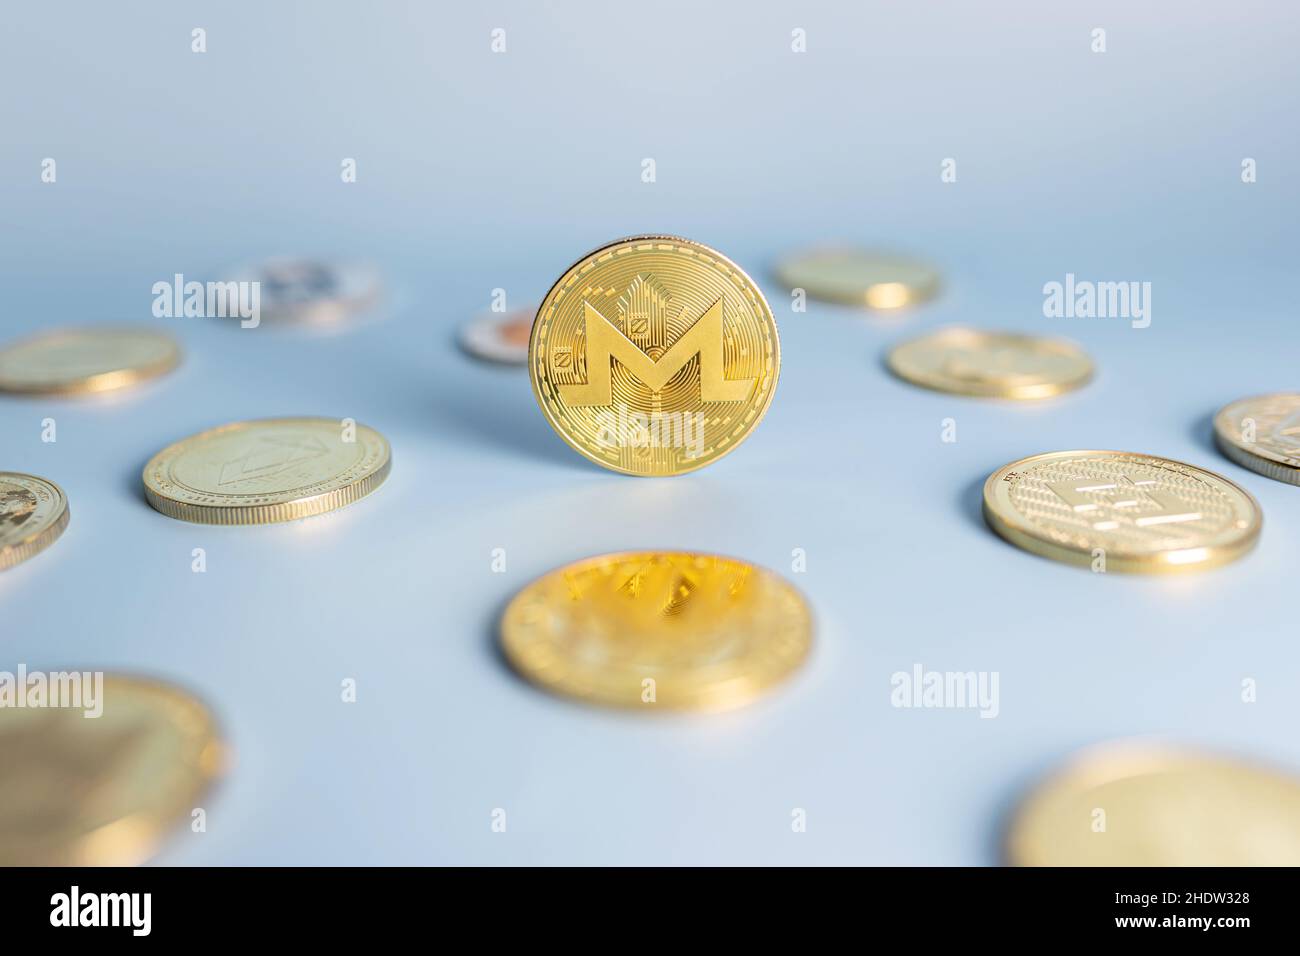 Monero coin standing centrally placed among bunch of cryptocurrency coins on blue background. Banner with golden XMR crypto token. Close-up, soft focus. Stock Photo